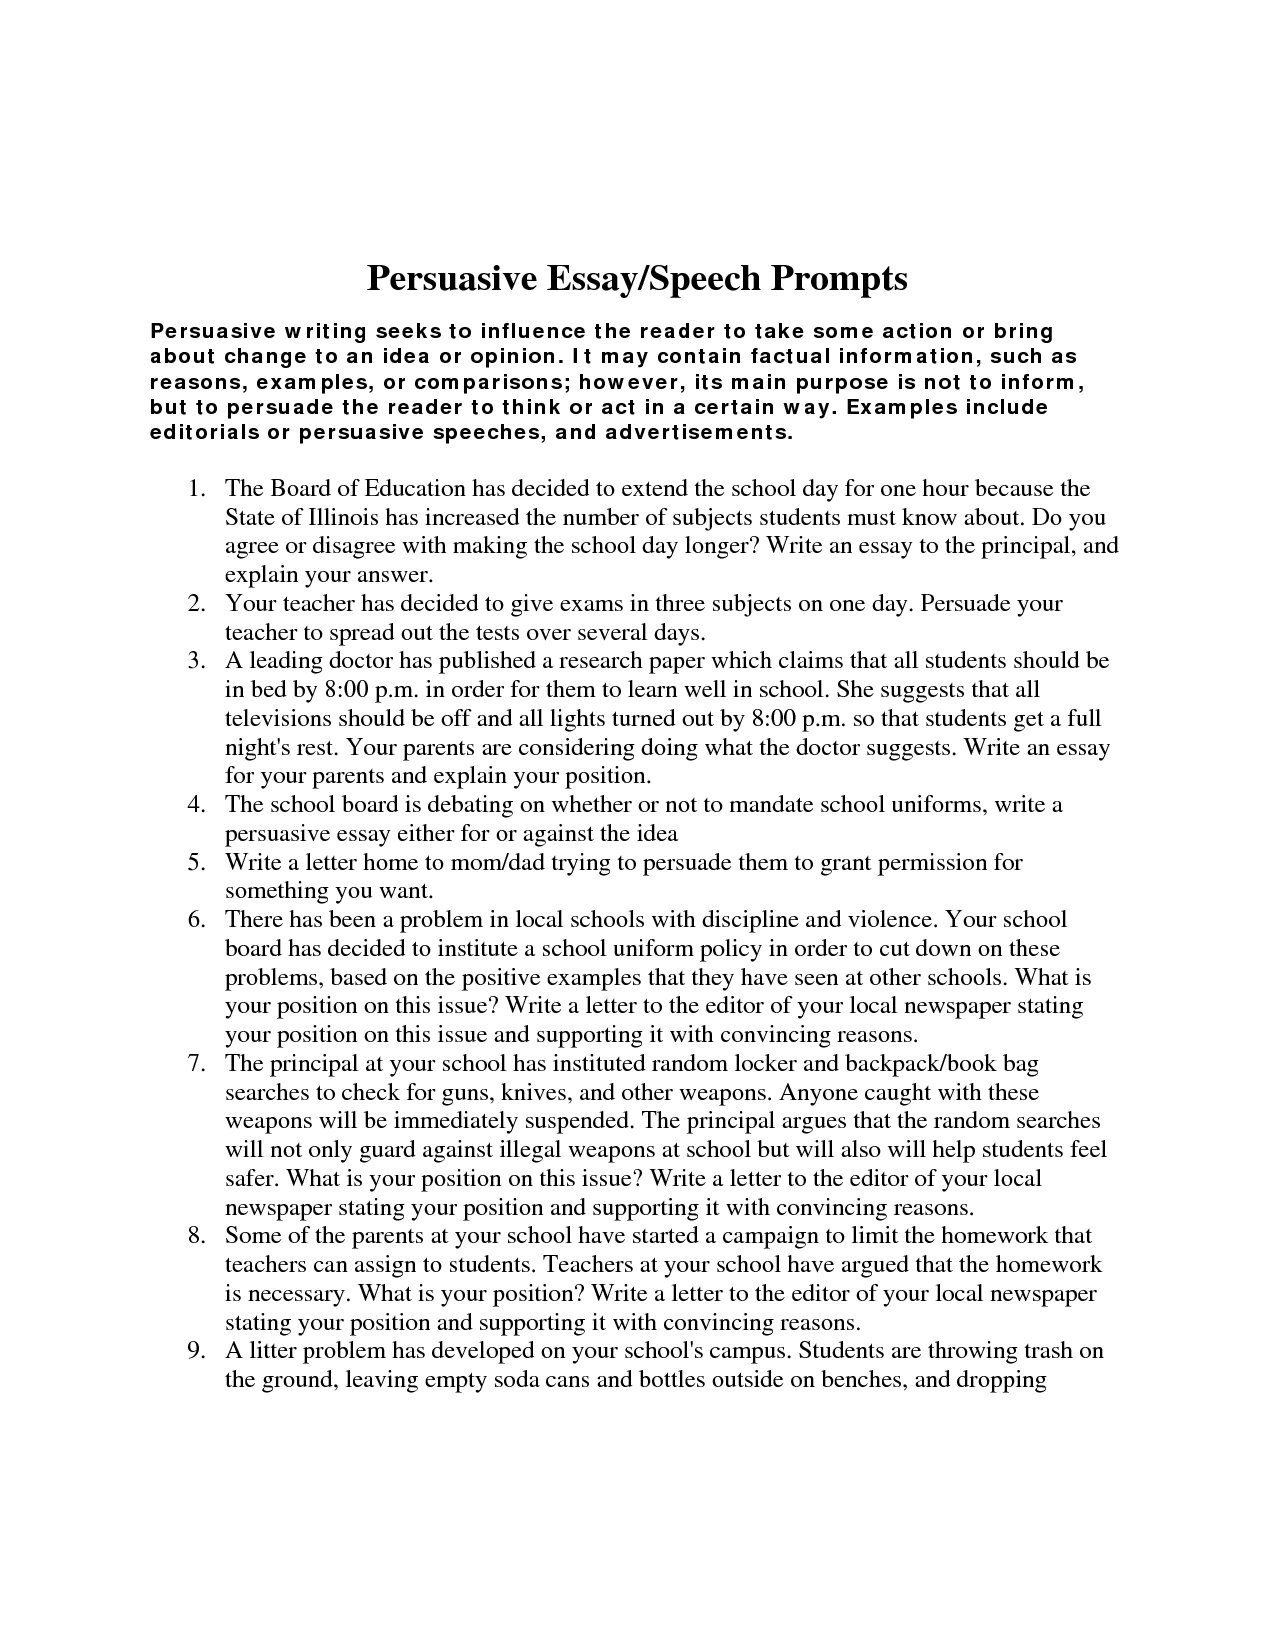 Personal statement essay examples